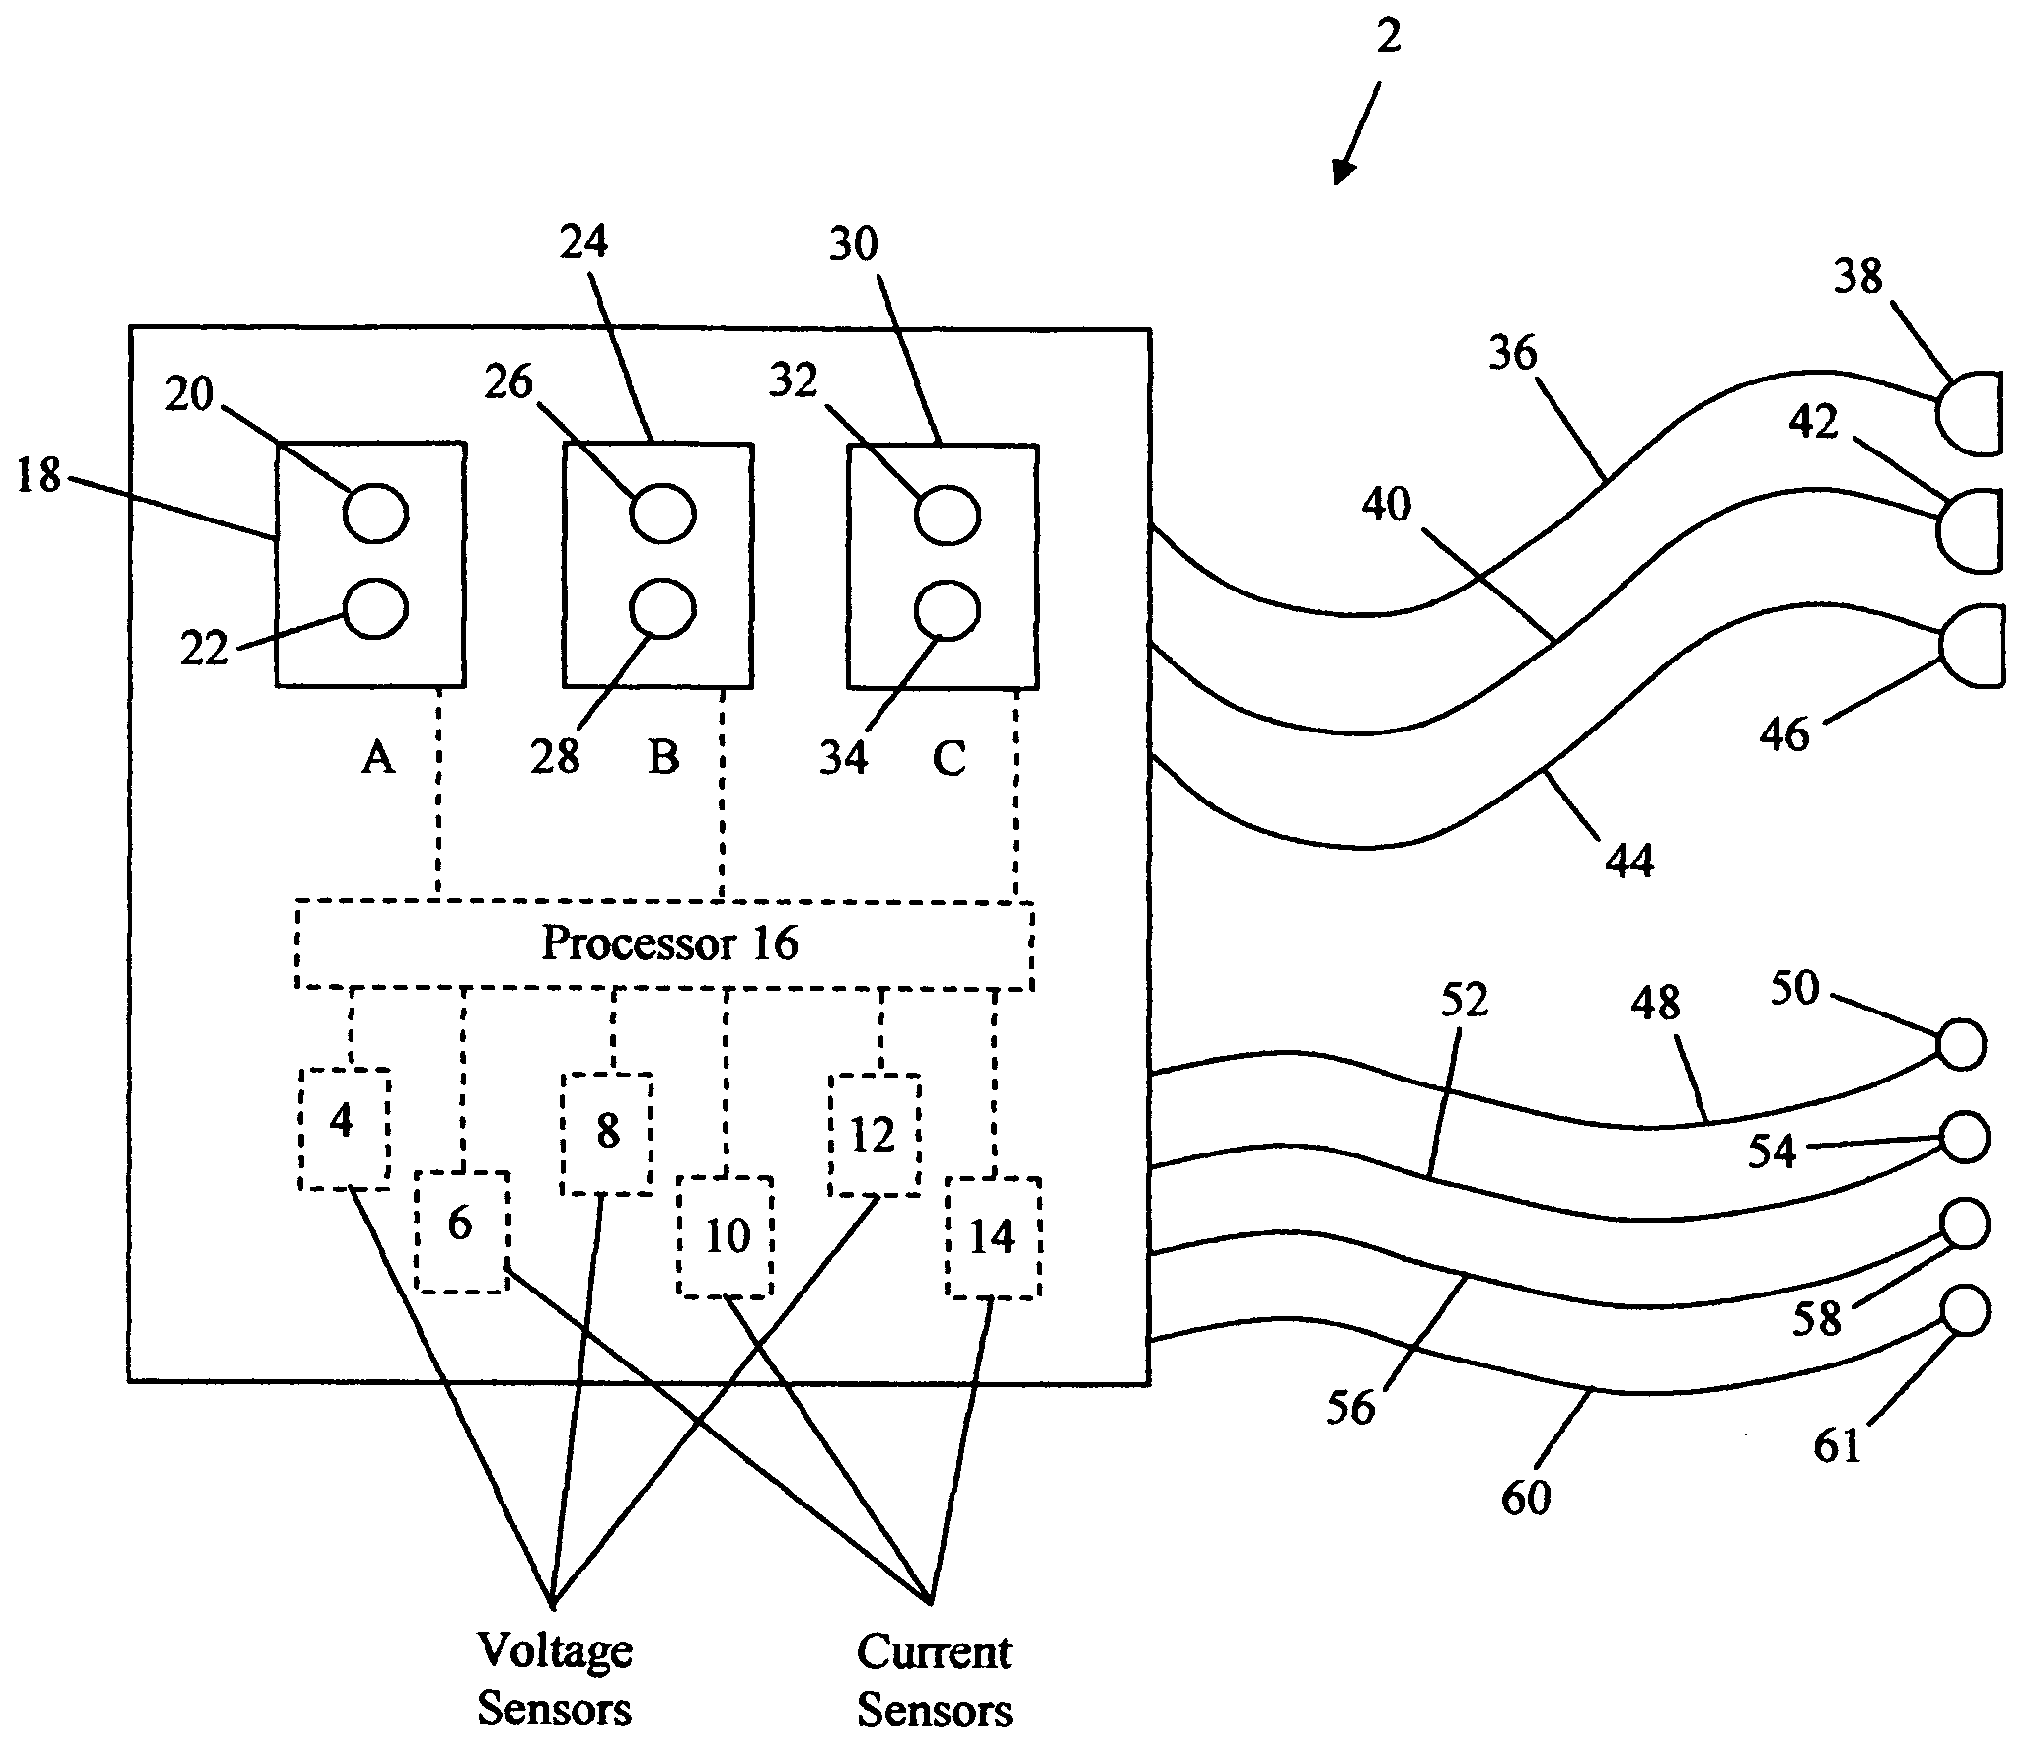 Electrical phase checking apparatus and method of metering